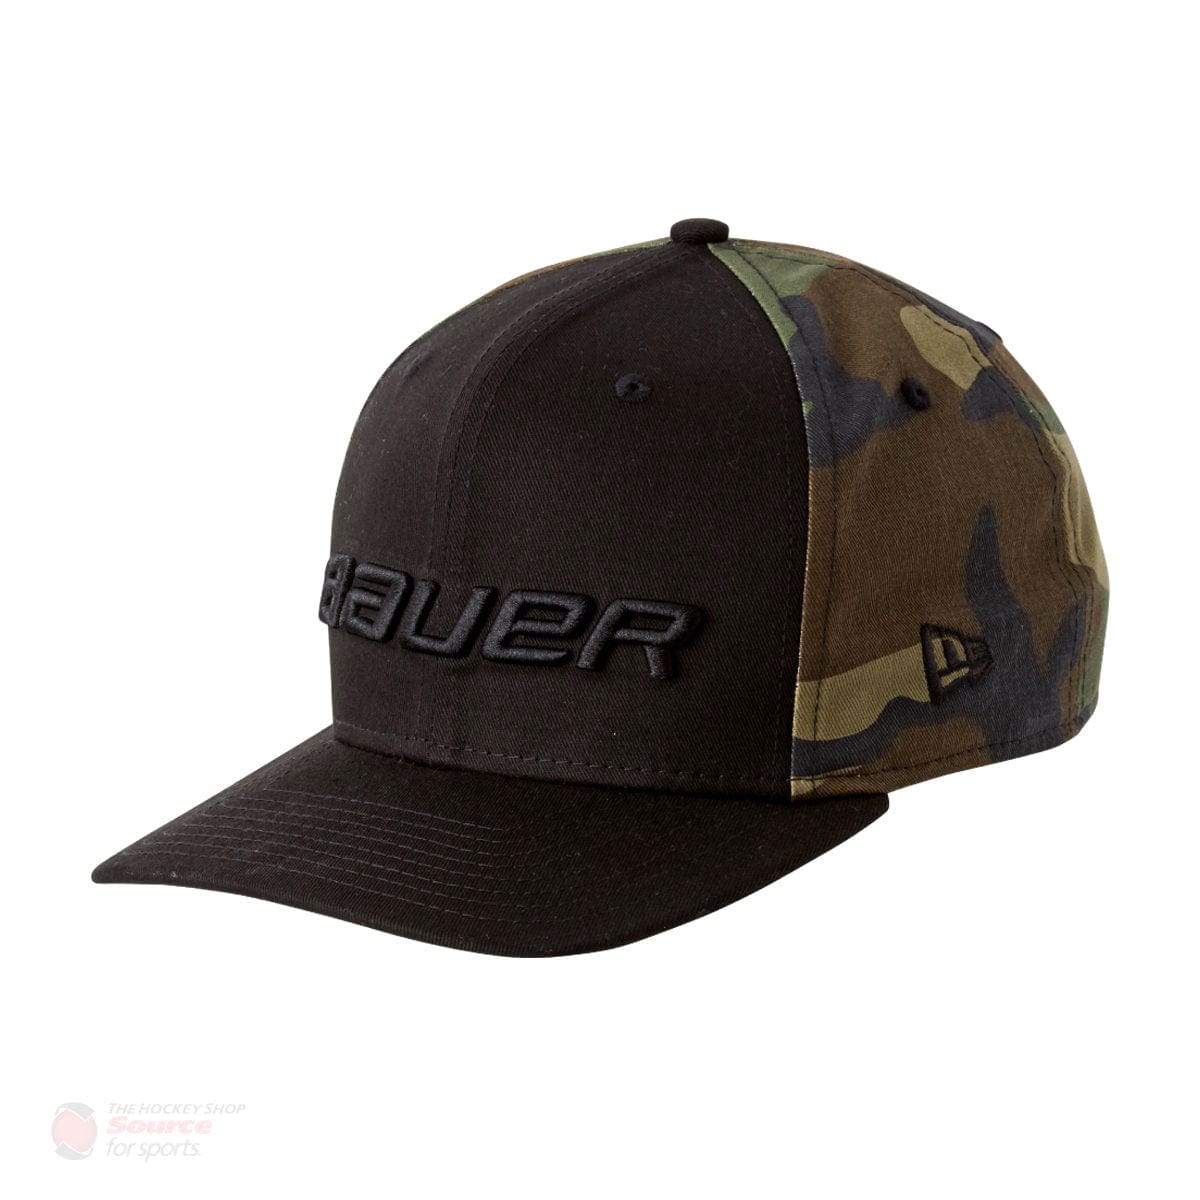 Bauer 9Fifty Camo Youth Snapback Hat